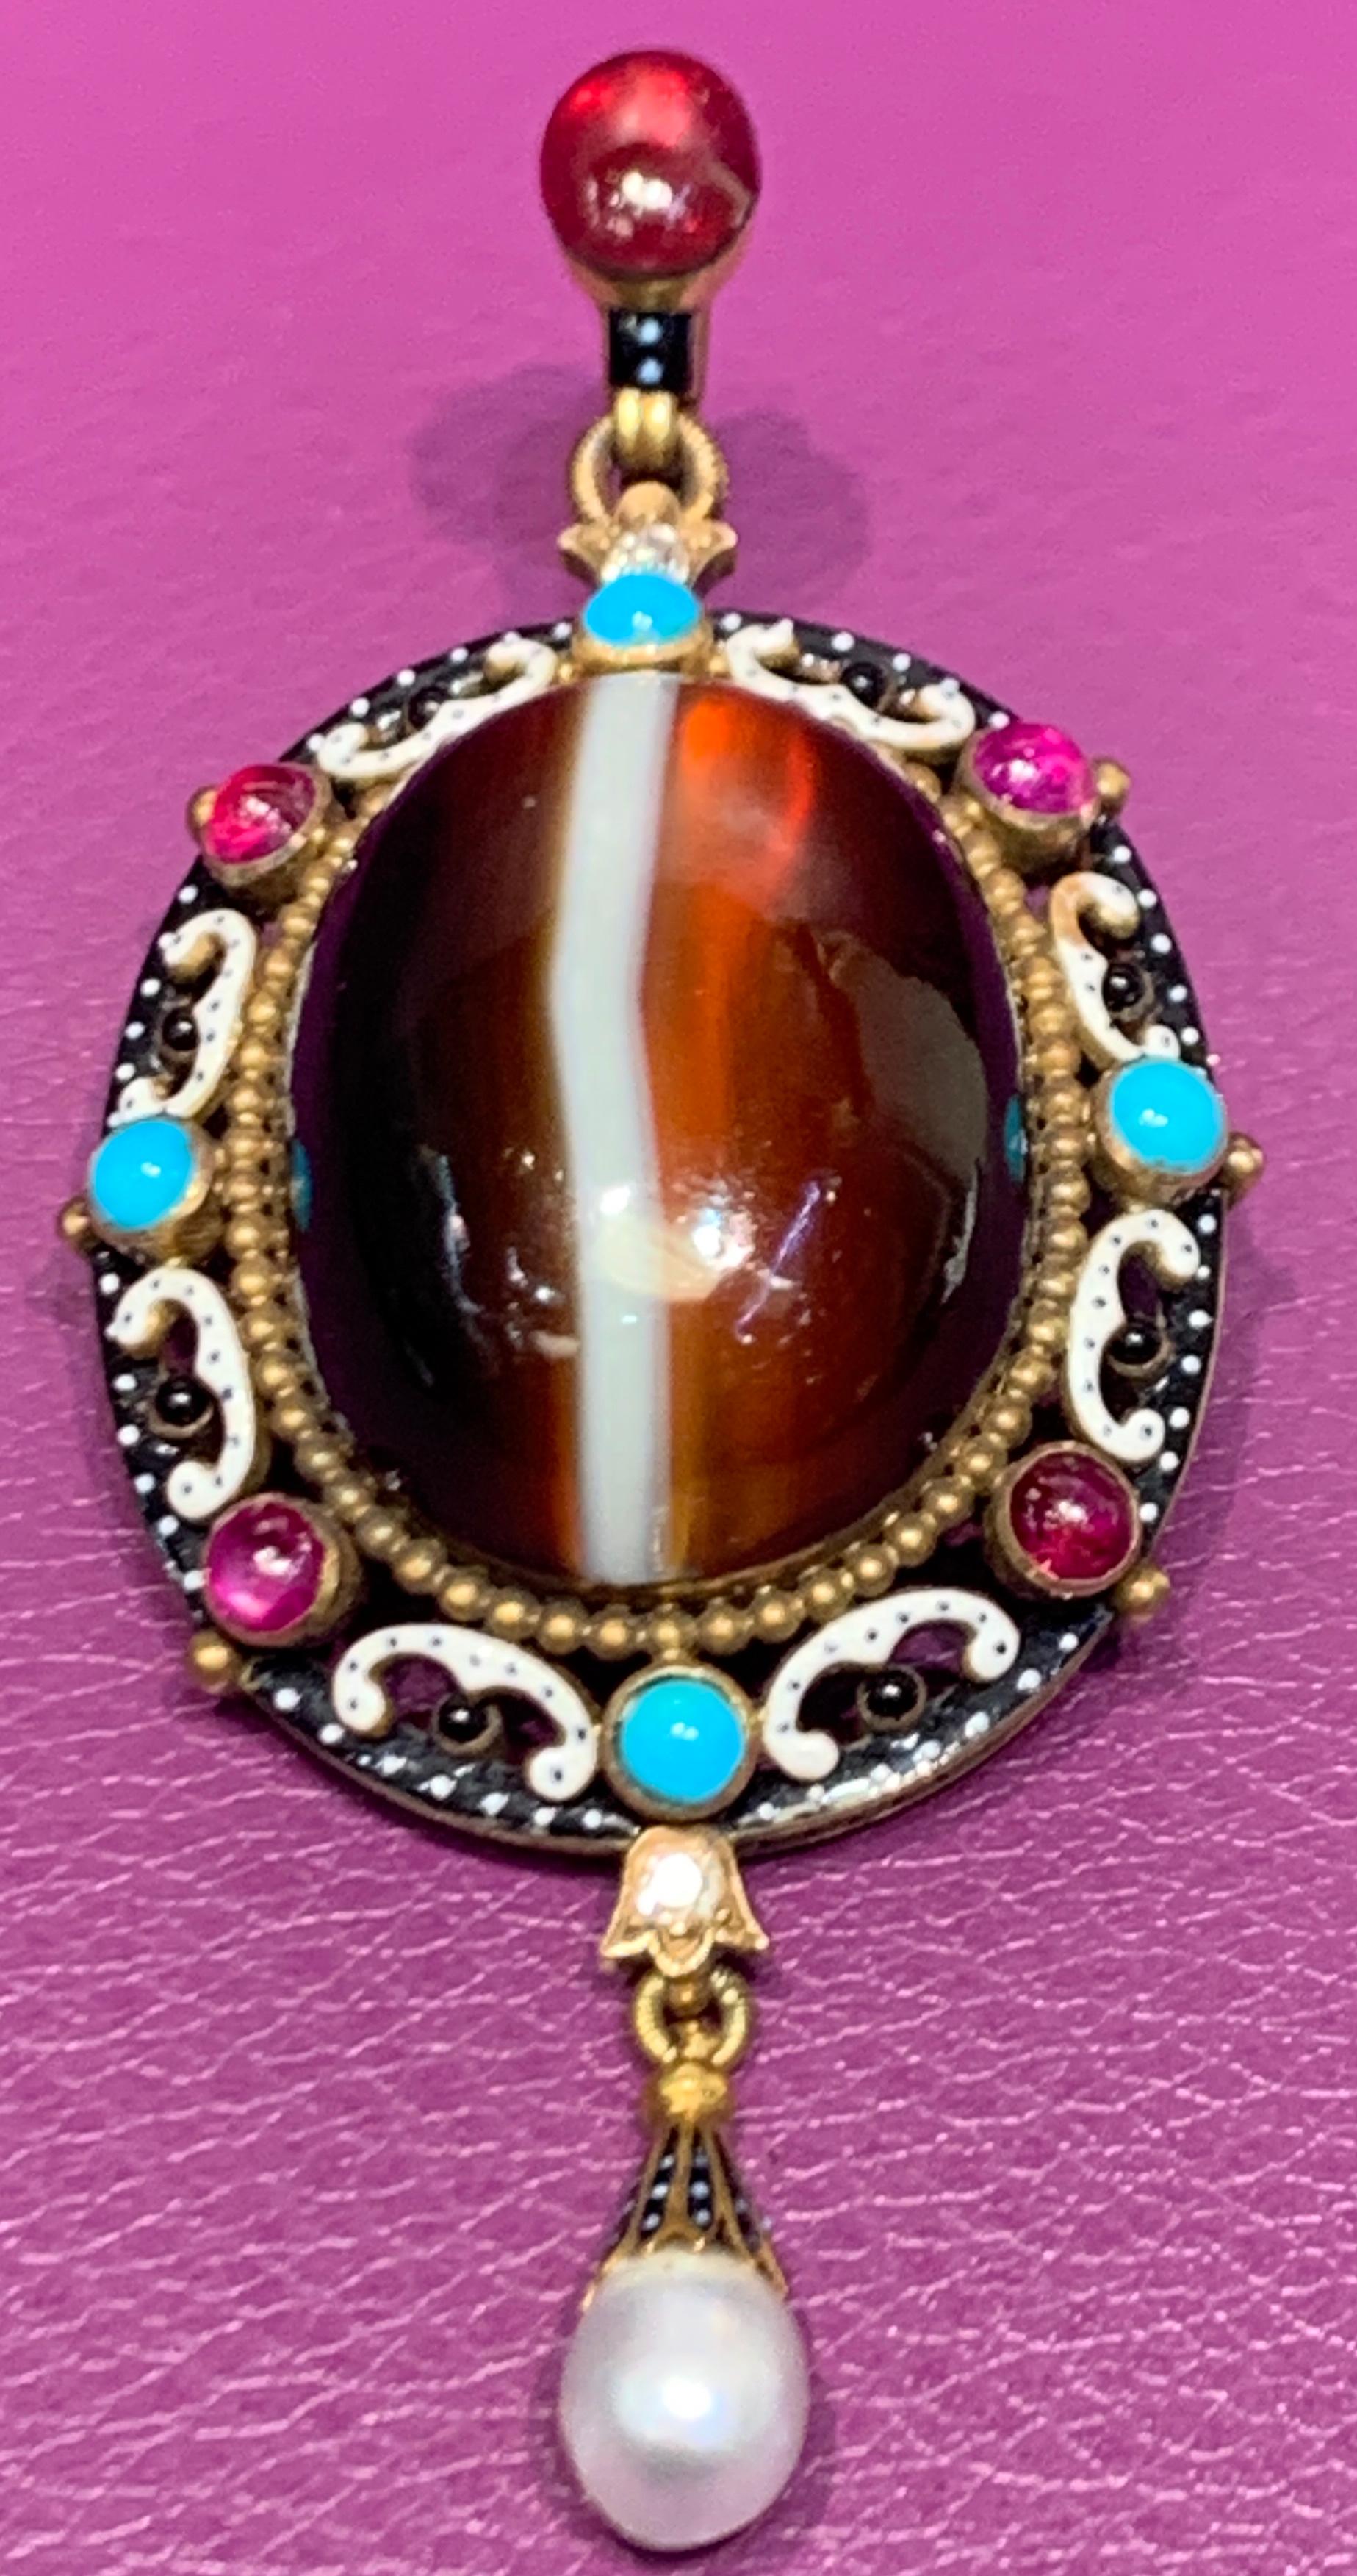 Antique Agate & Multi Gem Gold Brooch with black & white enamel
Renaissance Revival
2 diamonds
5 rubies
4 turquoise
1 pearl
Measurements: 3 inches long
Accompanied with original Phillips fitted box
Made circa 1900
